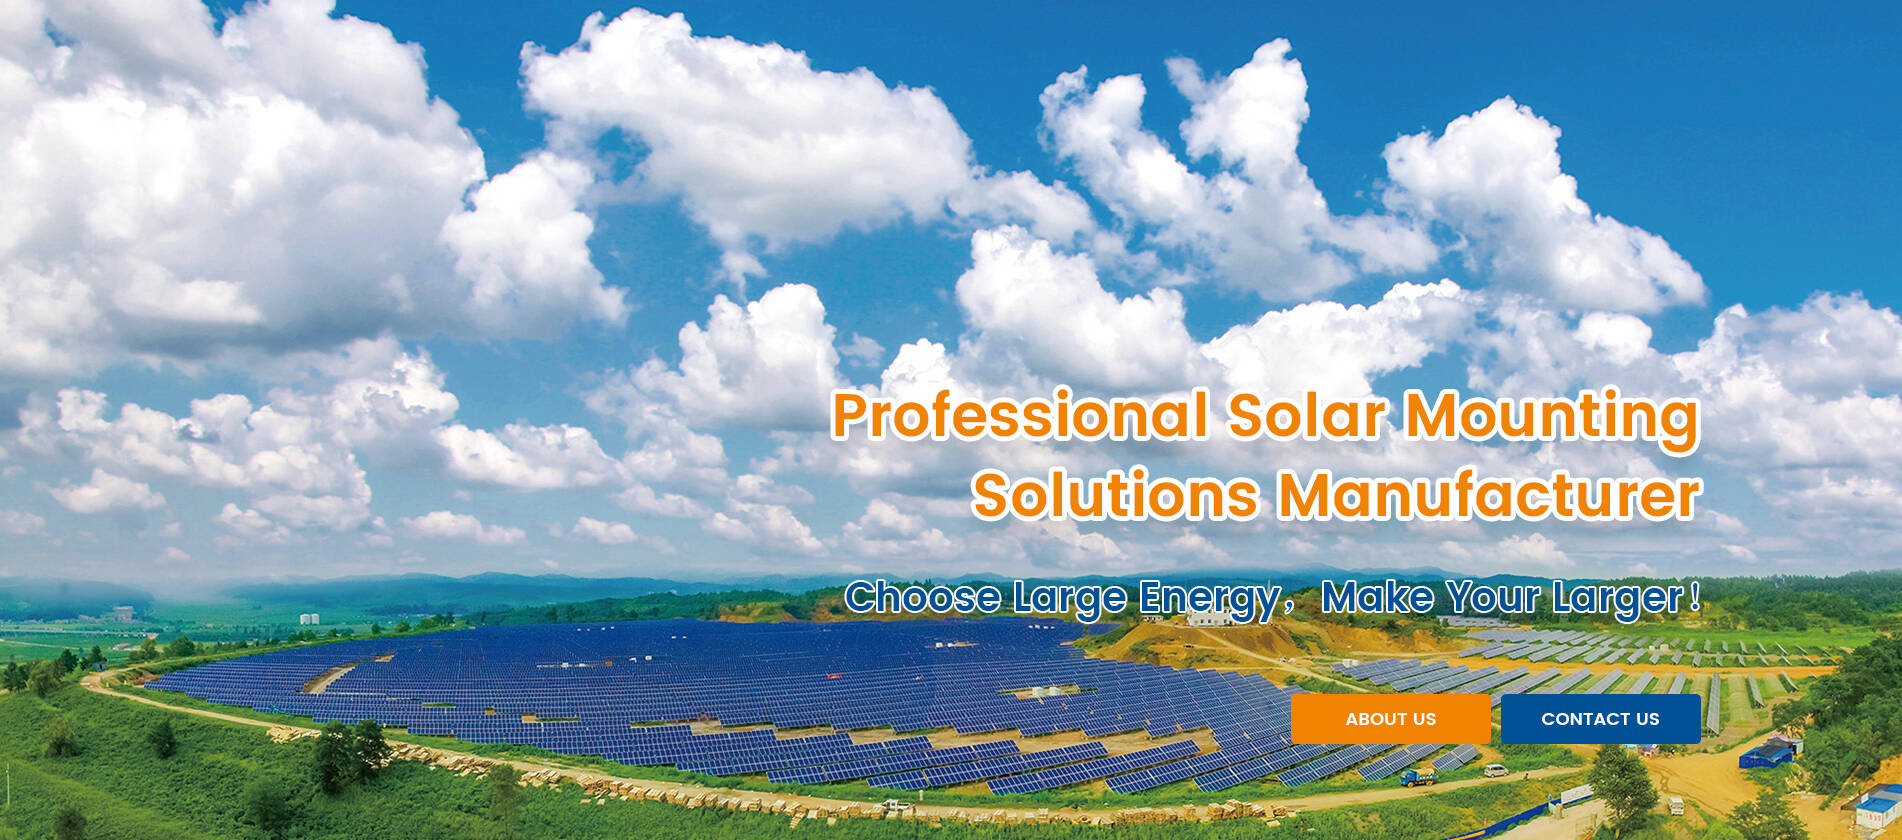 Professional Solar Mounting Solutions Manufacturer